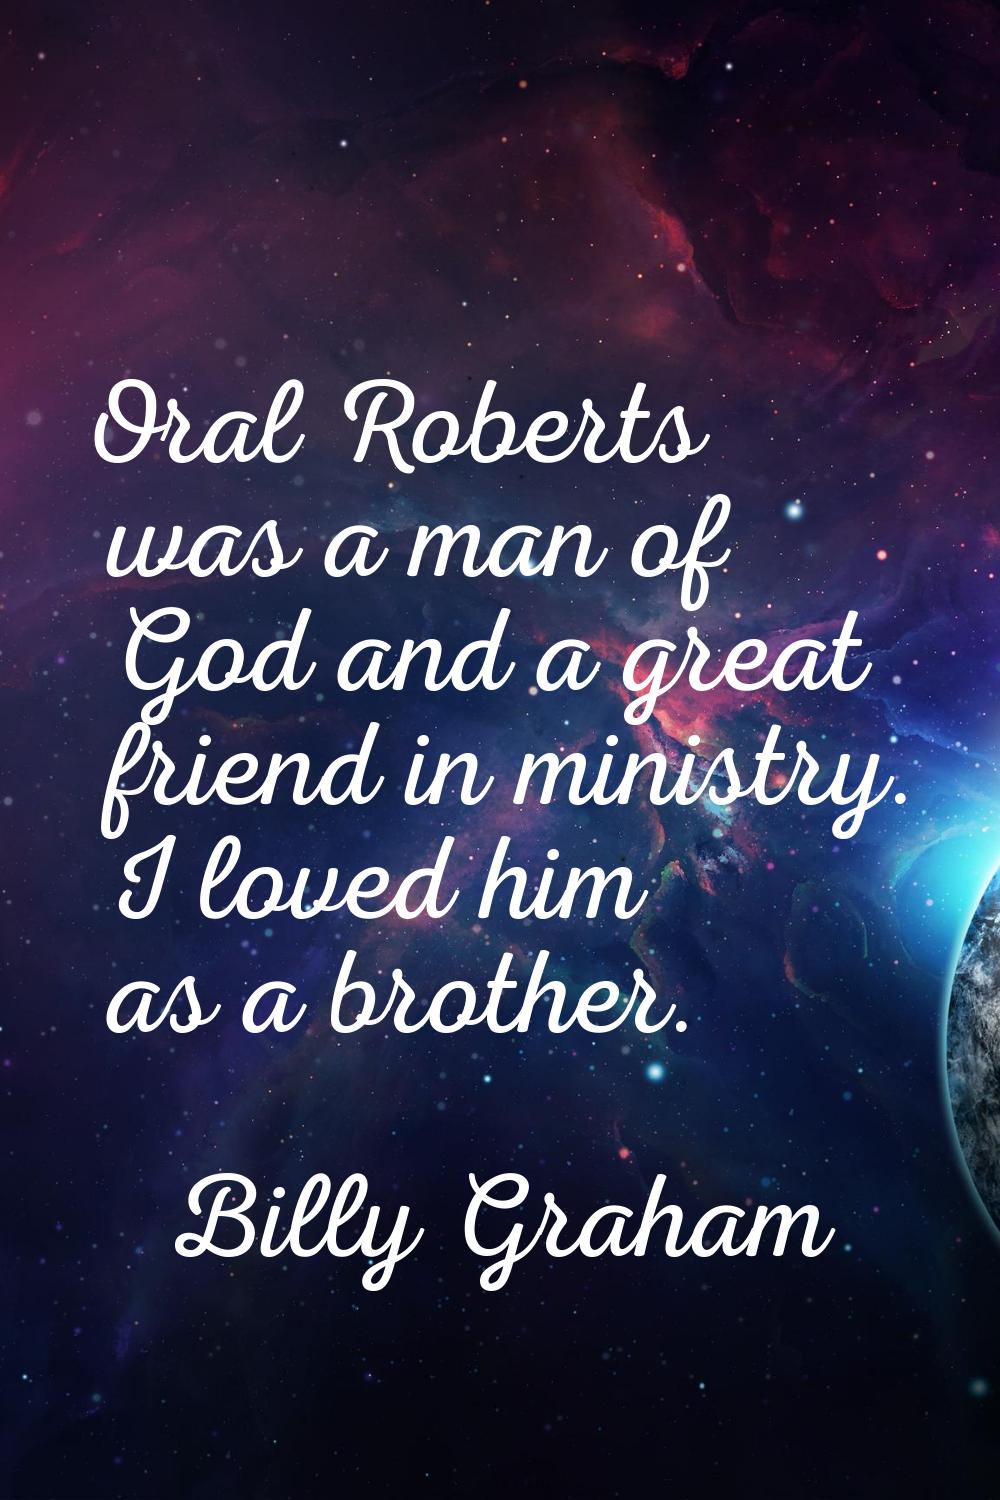 Oral Roberts was a man of God and a great friend in ministry. I loved him as a brother.